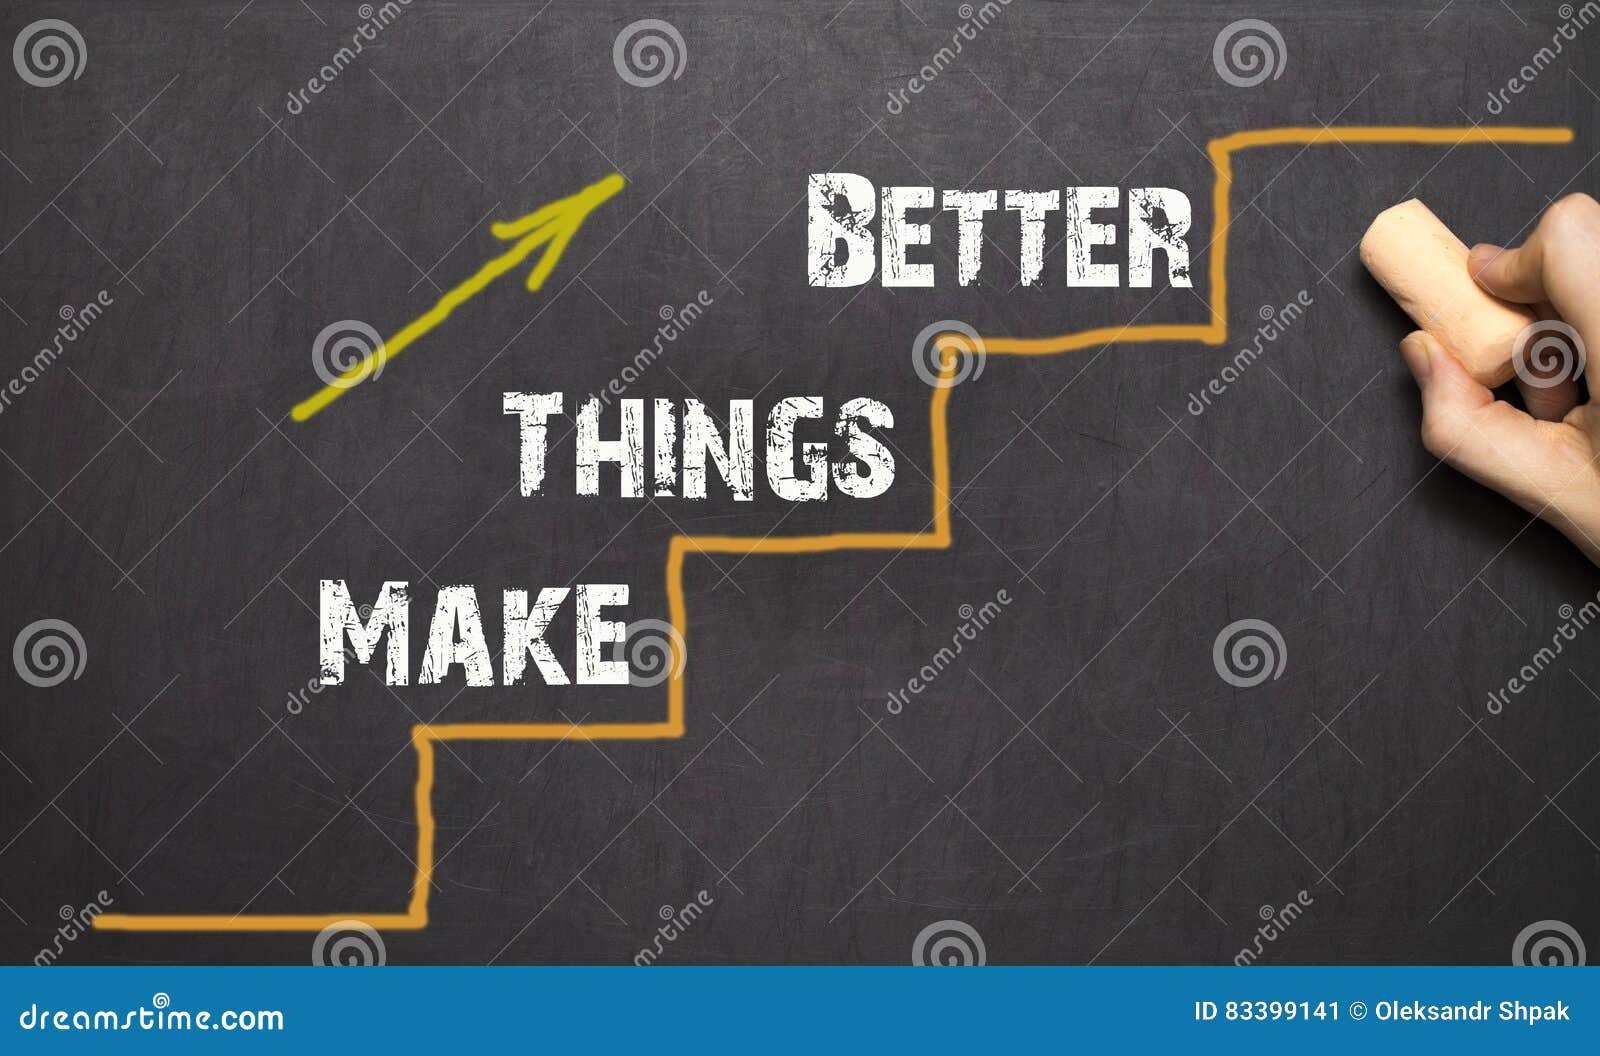 make things better - improvement concept